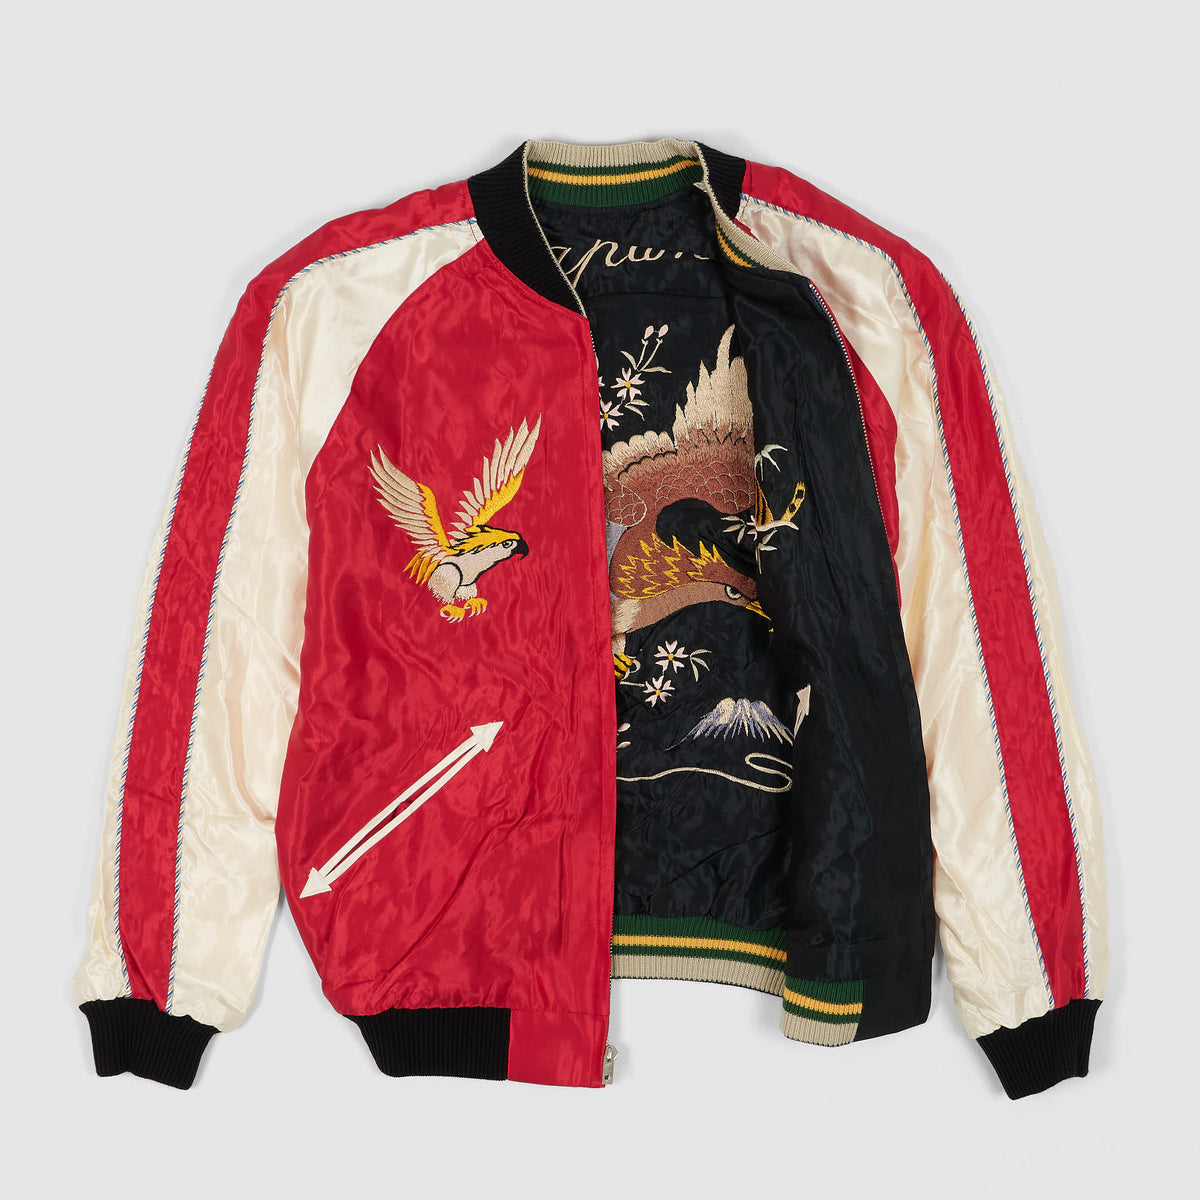 Tailor Toyo Souvenir Jacket Tiger and Eagle Unisex - DeeCee style